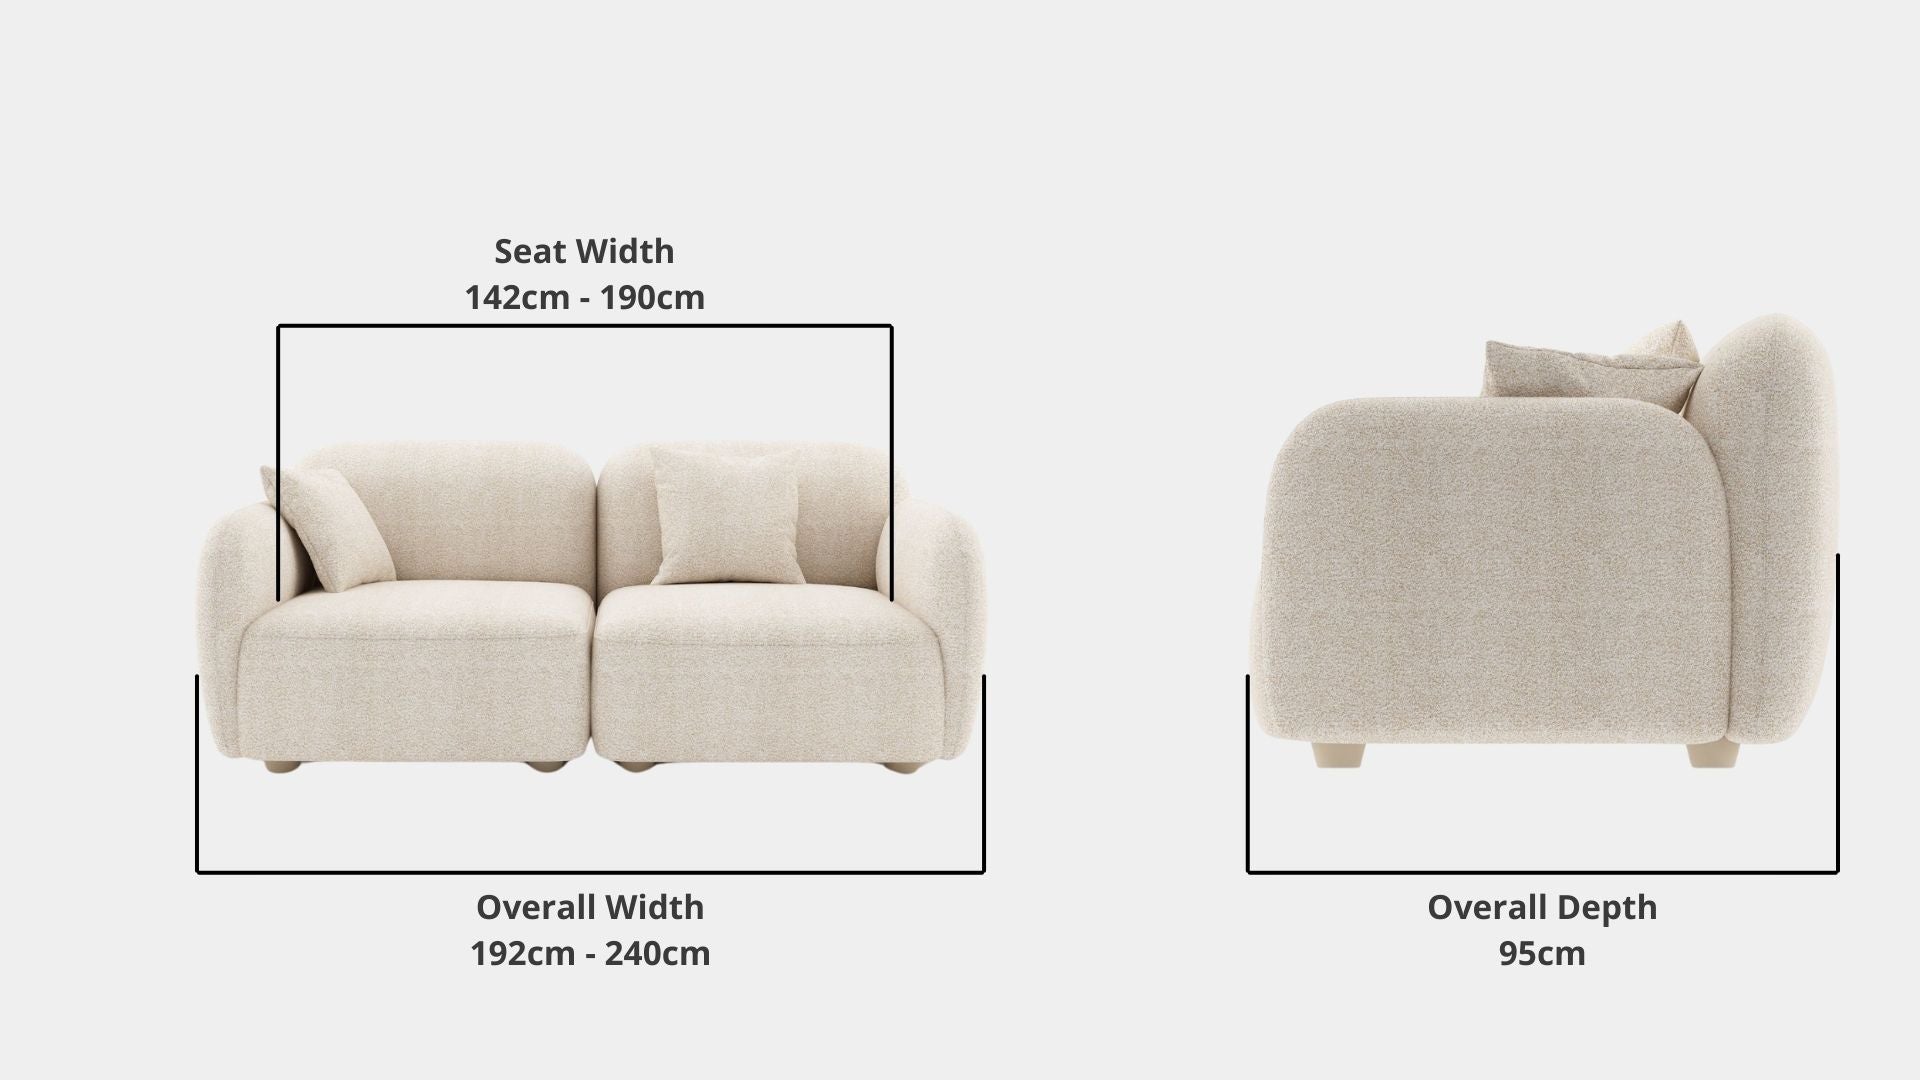 Details the key dimensions in terms of overall width, overall depth and seat width for Charmy Fabric Sofa